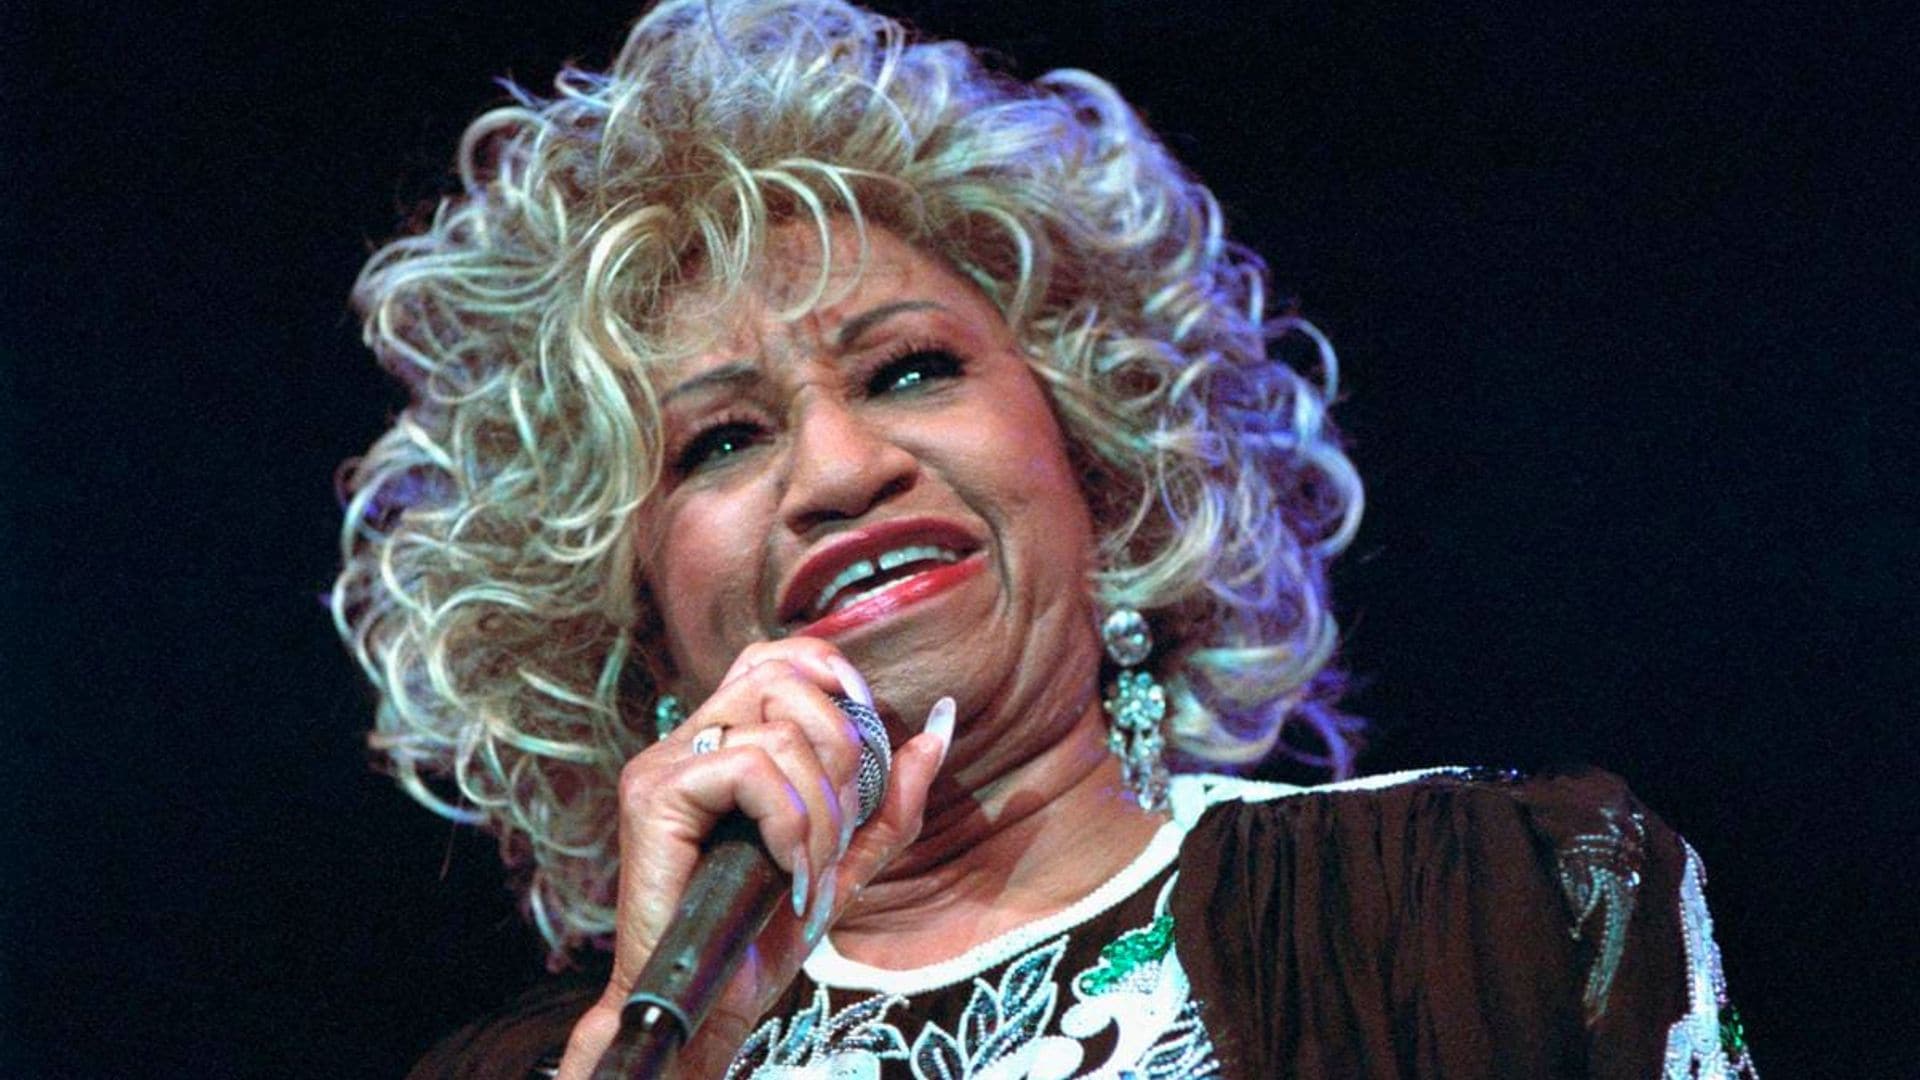 Celia Cruz is among the icons set to be featured on United States’ currency